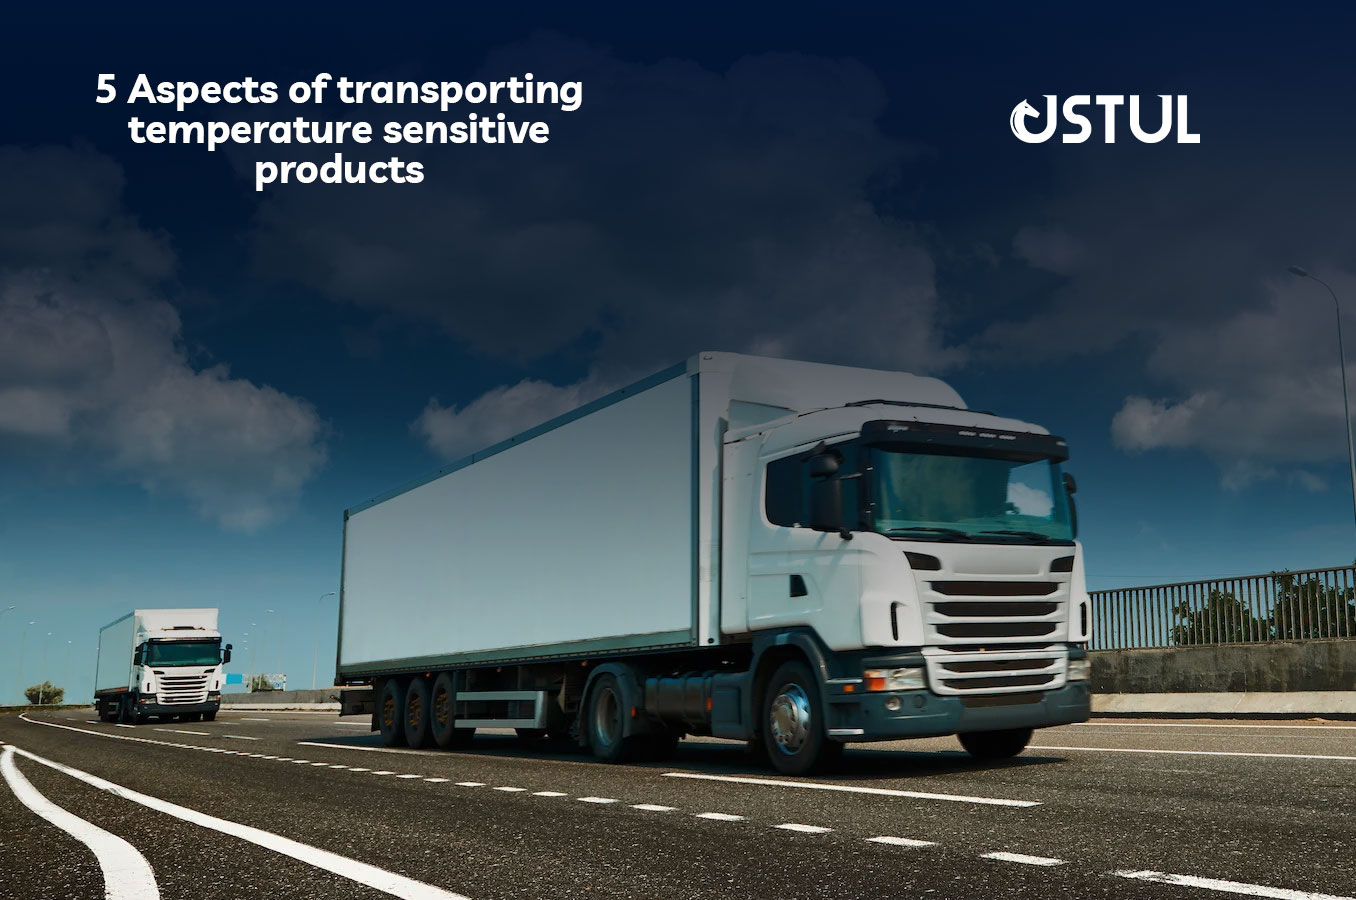 5 Aspects of Transporting Temperature Sensitive Products